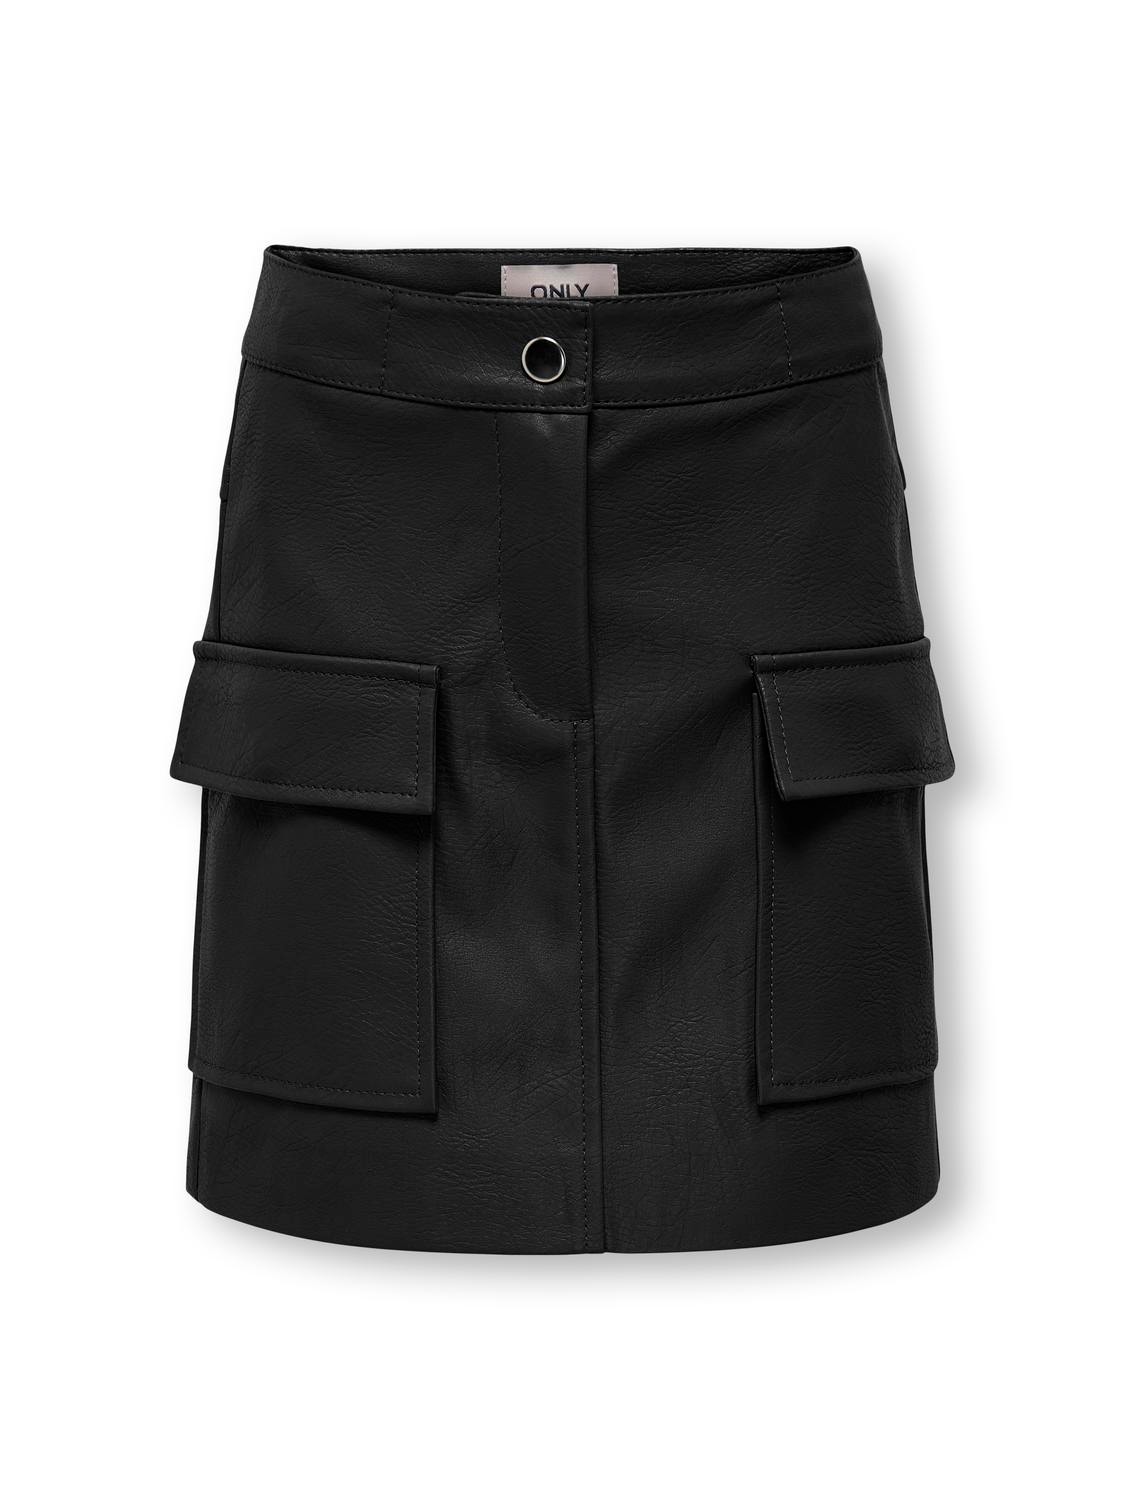 ONLY Short skirt with pockets -Black - 15296068